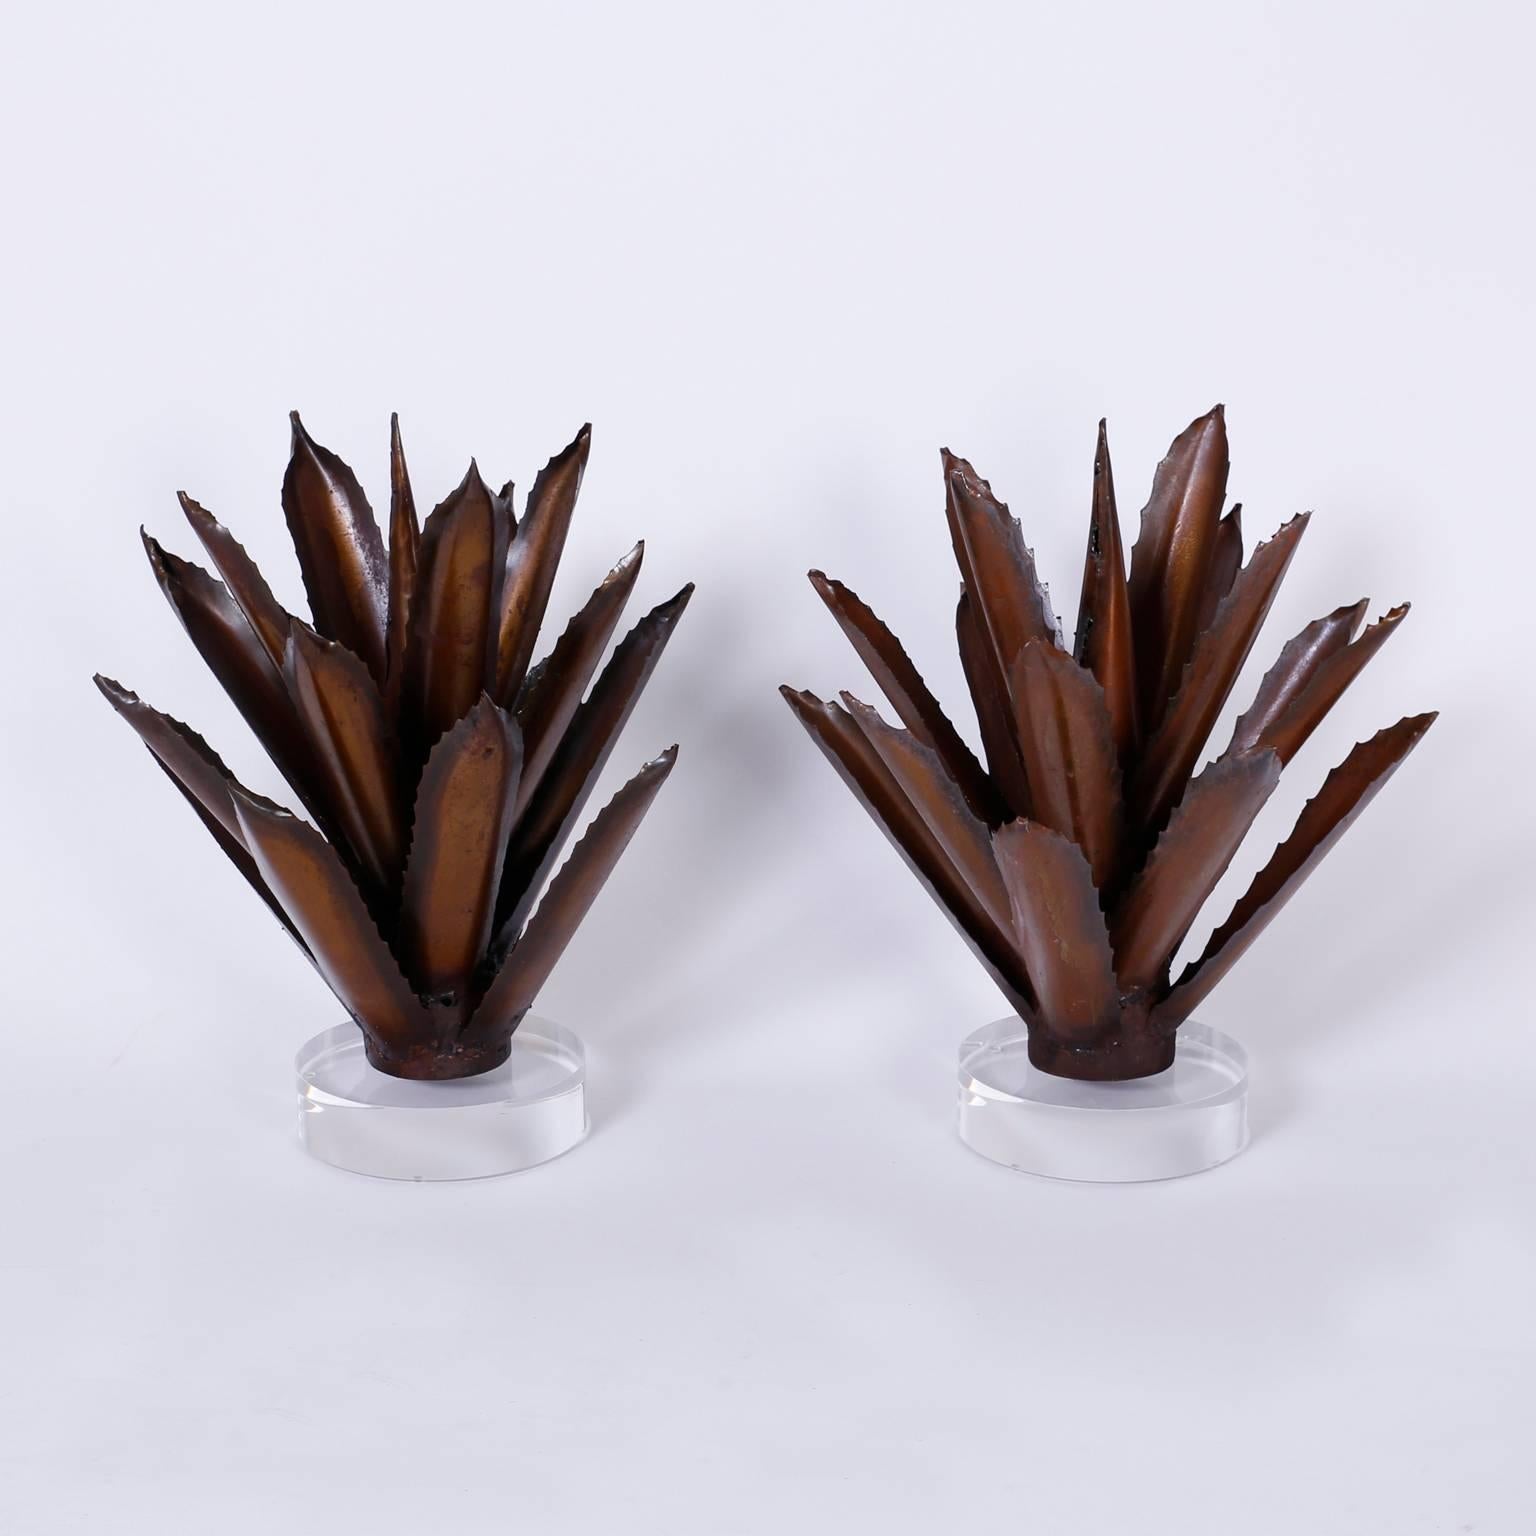 Pair of brutalist Agave sculptures or garnitures with a burnt oxidized patina presented on Lucite stands.
   